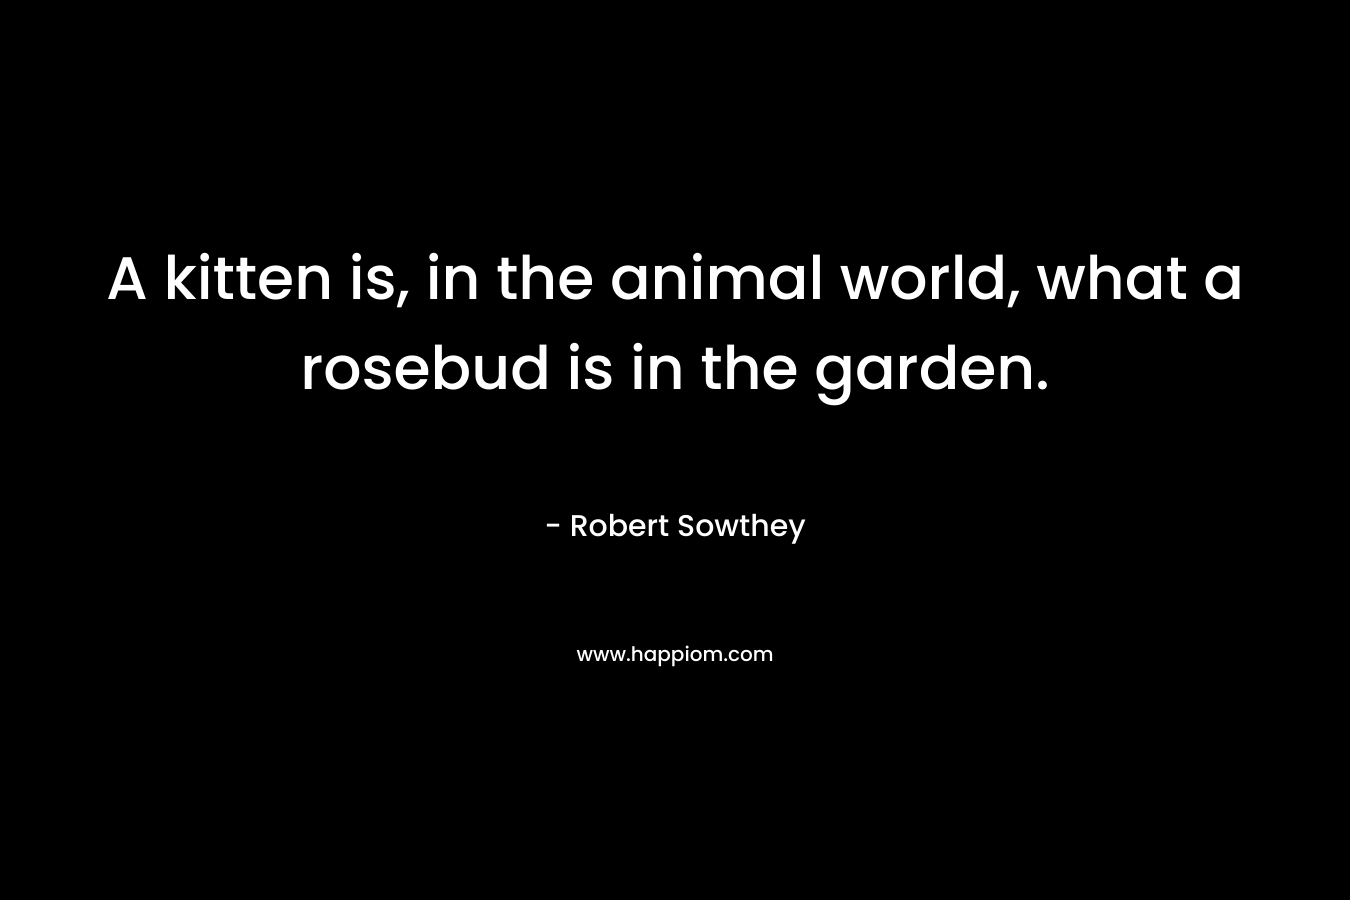 A kitten is, in the animal world, what a rosebud is in the garden. – Robert Sowthey